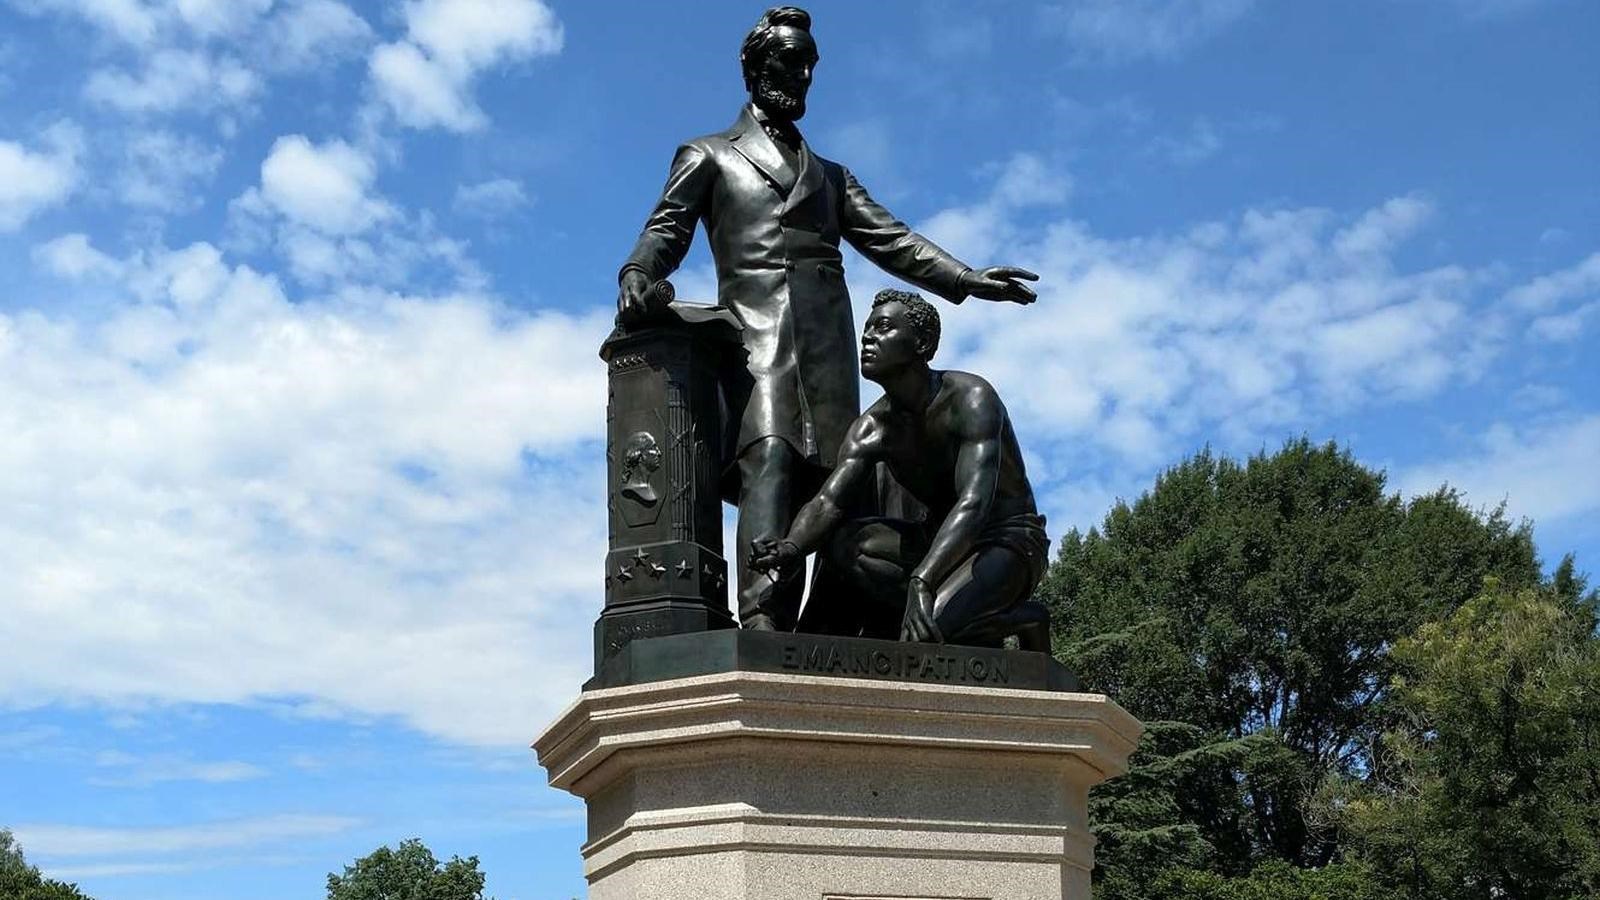 Bronze statue of Abraham Lincoln standing over a freed slave who is kneeling and looking up.